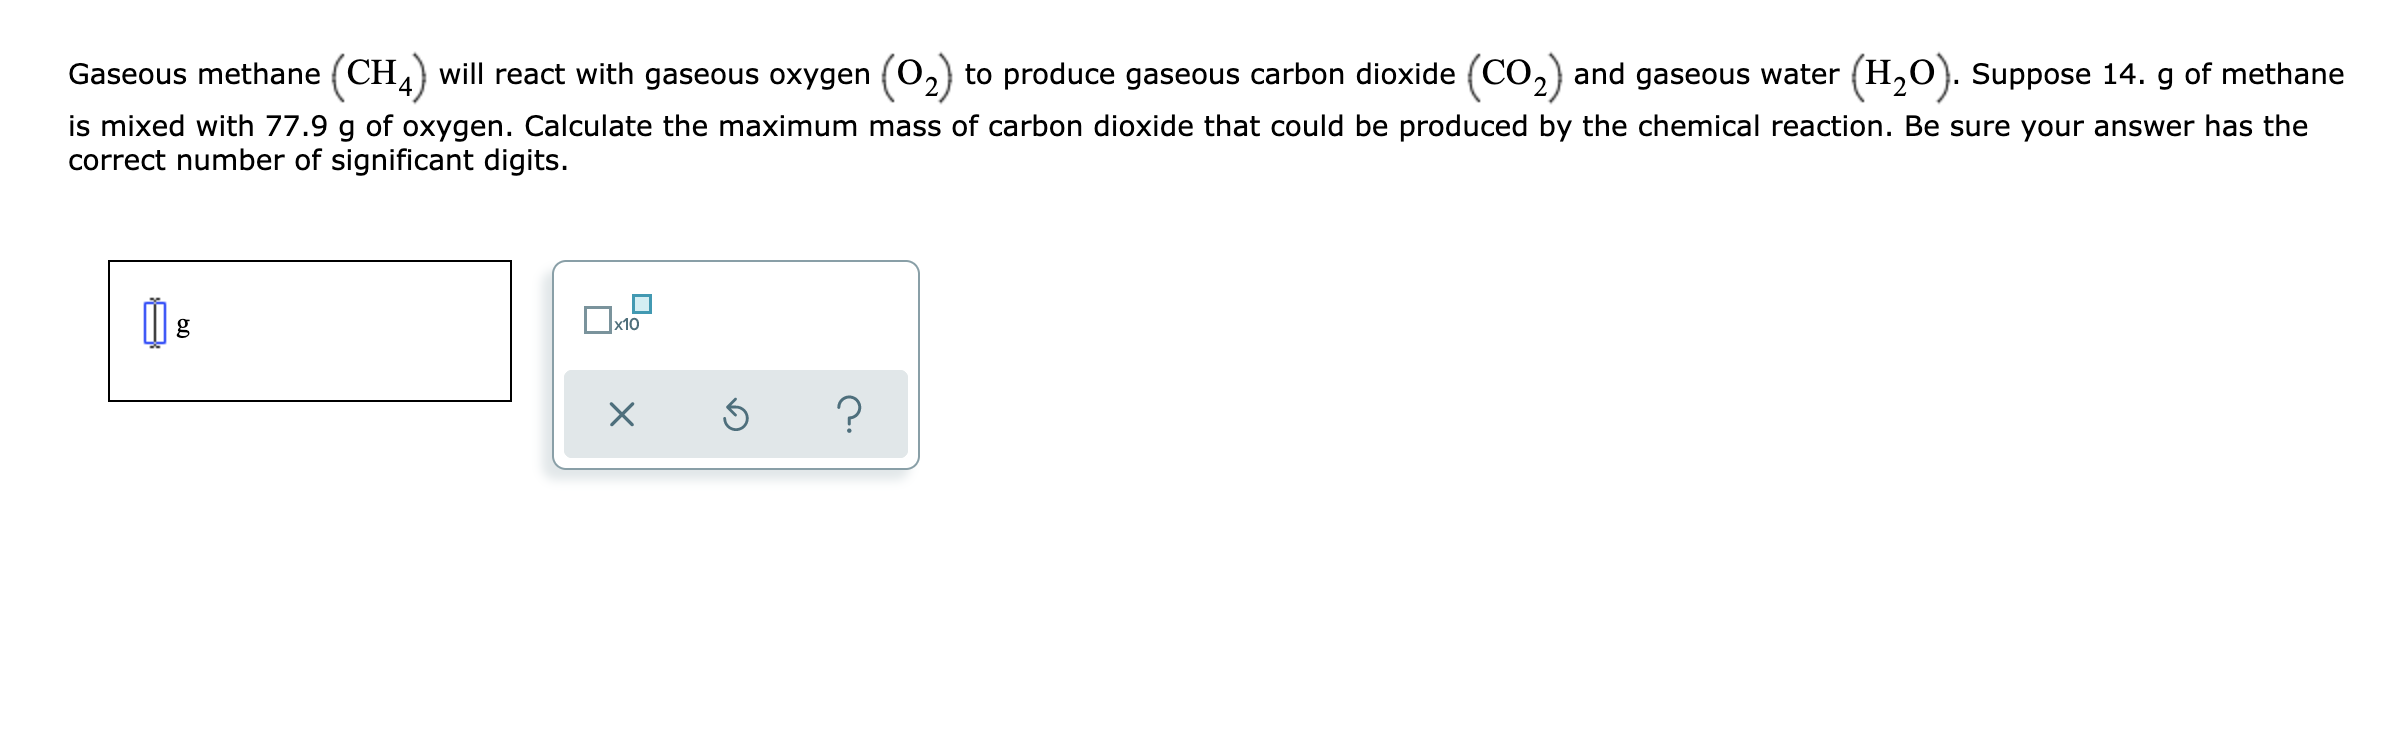 Gaseous methane (CH,) will react with gaseous oxygen (O,) to produce gaseous carbon dioxide (CO,) and gaseous water (H,O). Suppose 14. g of methane
is mixed with 77.9 g of oxygen. Calculate the maximum mass of carbon dioxide that could be produced by the chemical reaction. Be sure your answer has the
correct number of significant digits.
x10
